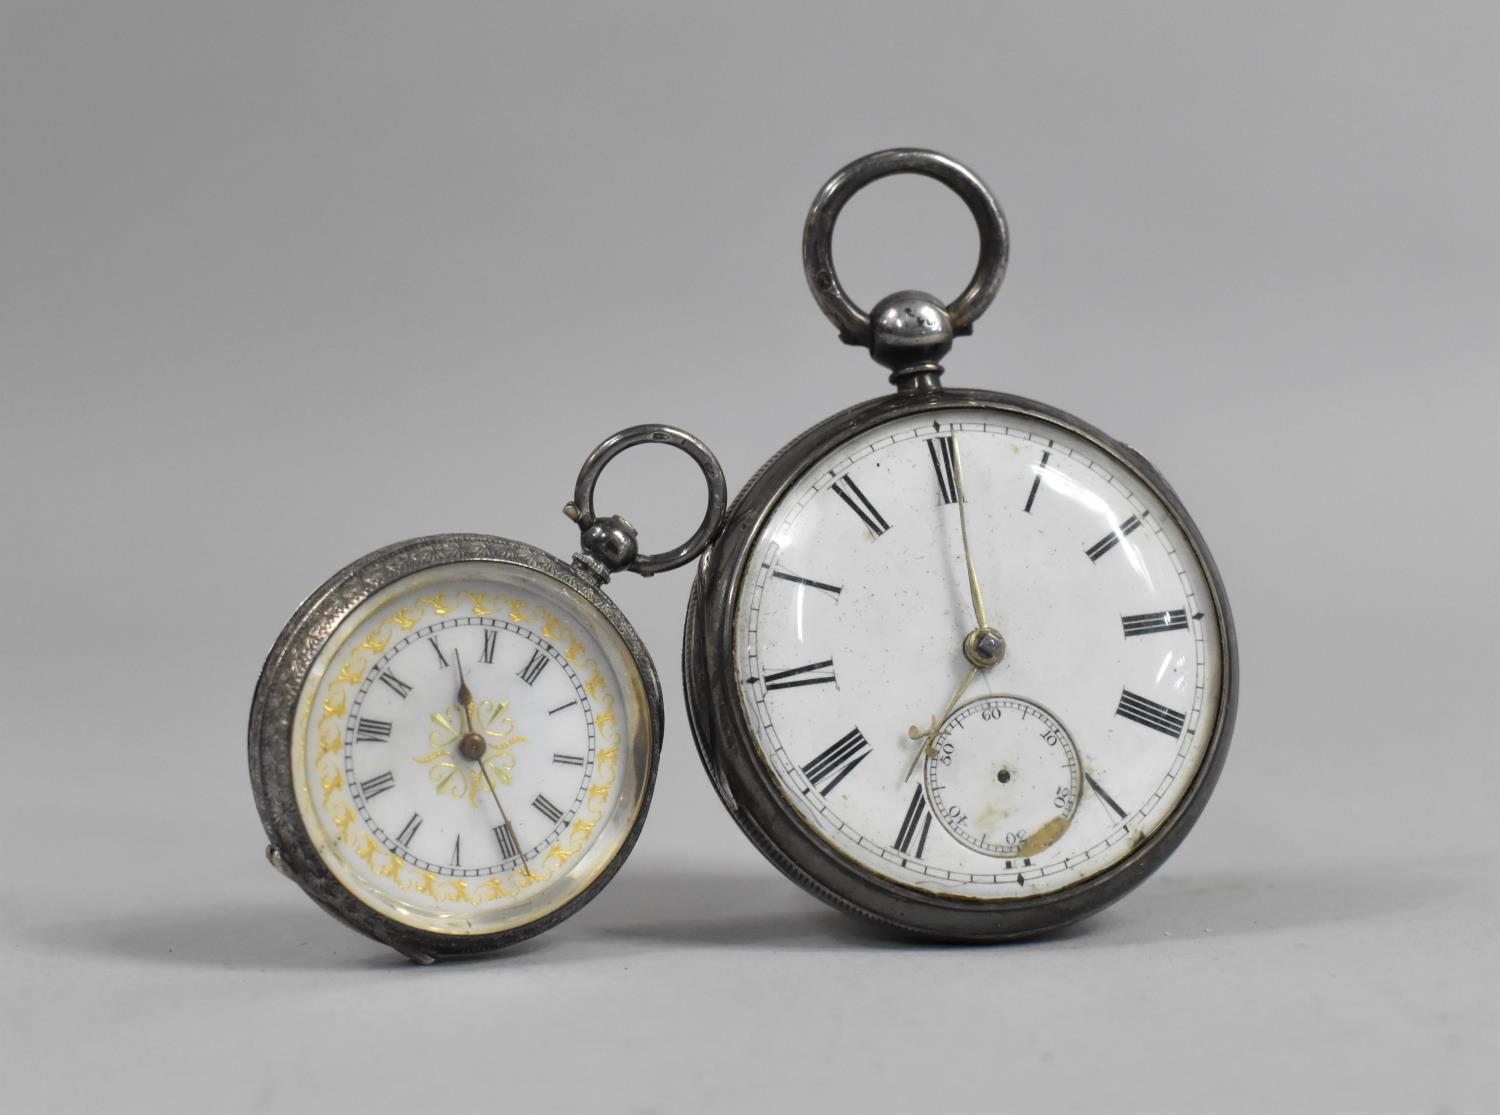 A Gents Silver Pocket Watch and a Continental ladies Silver Pocket Watch